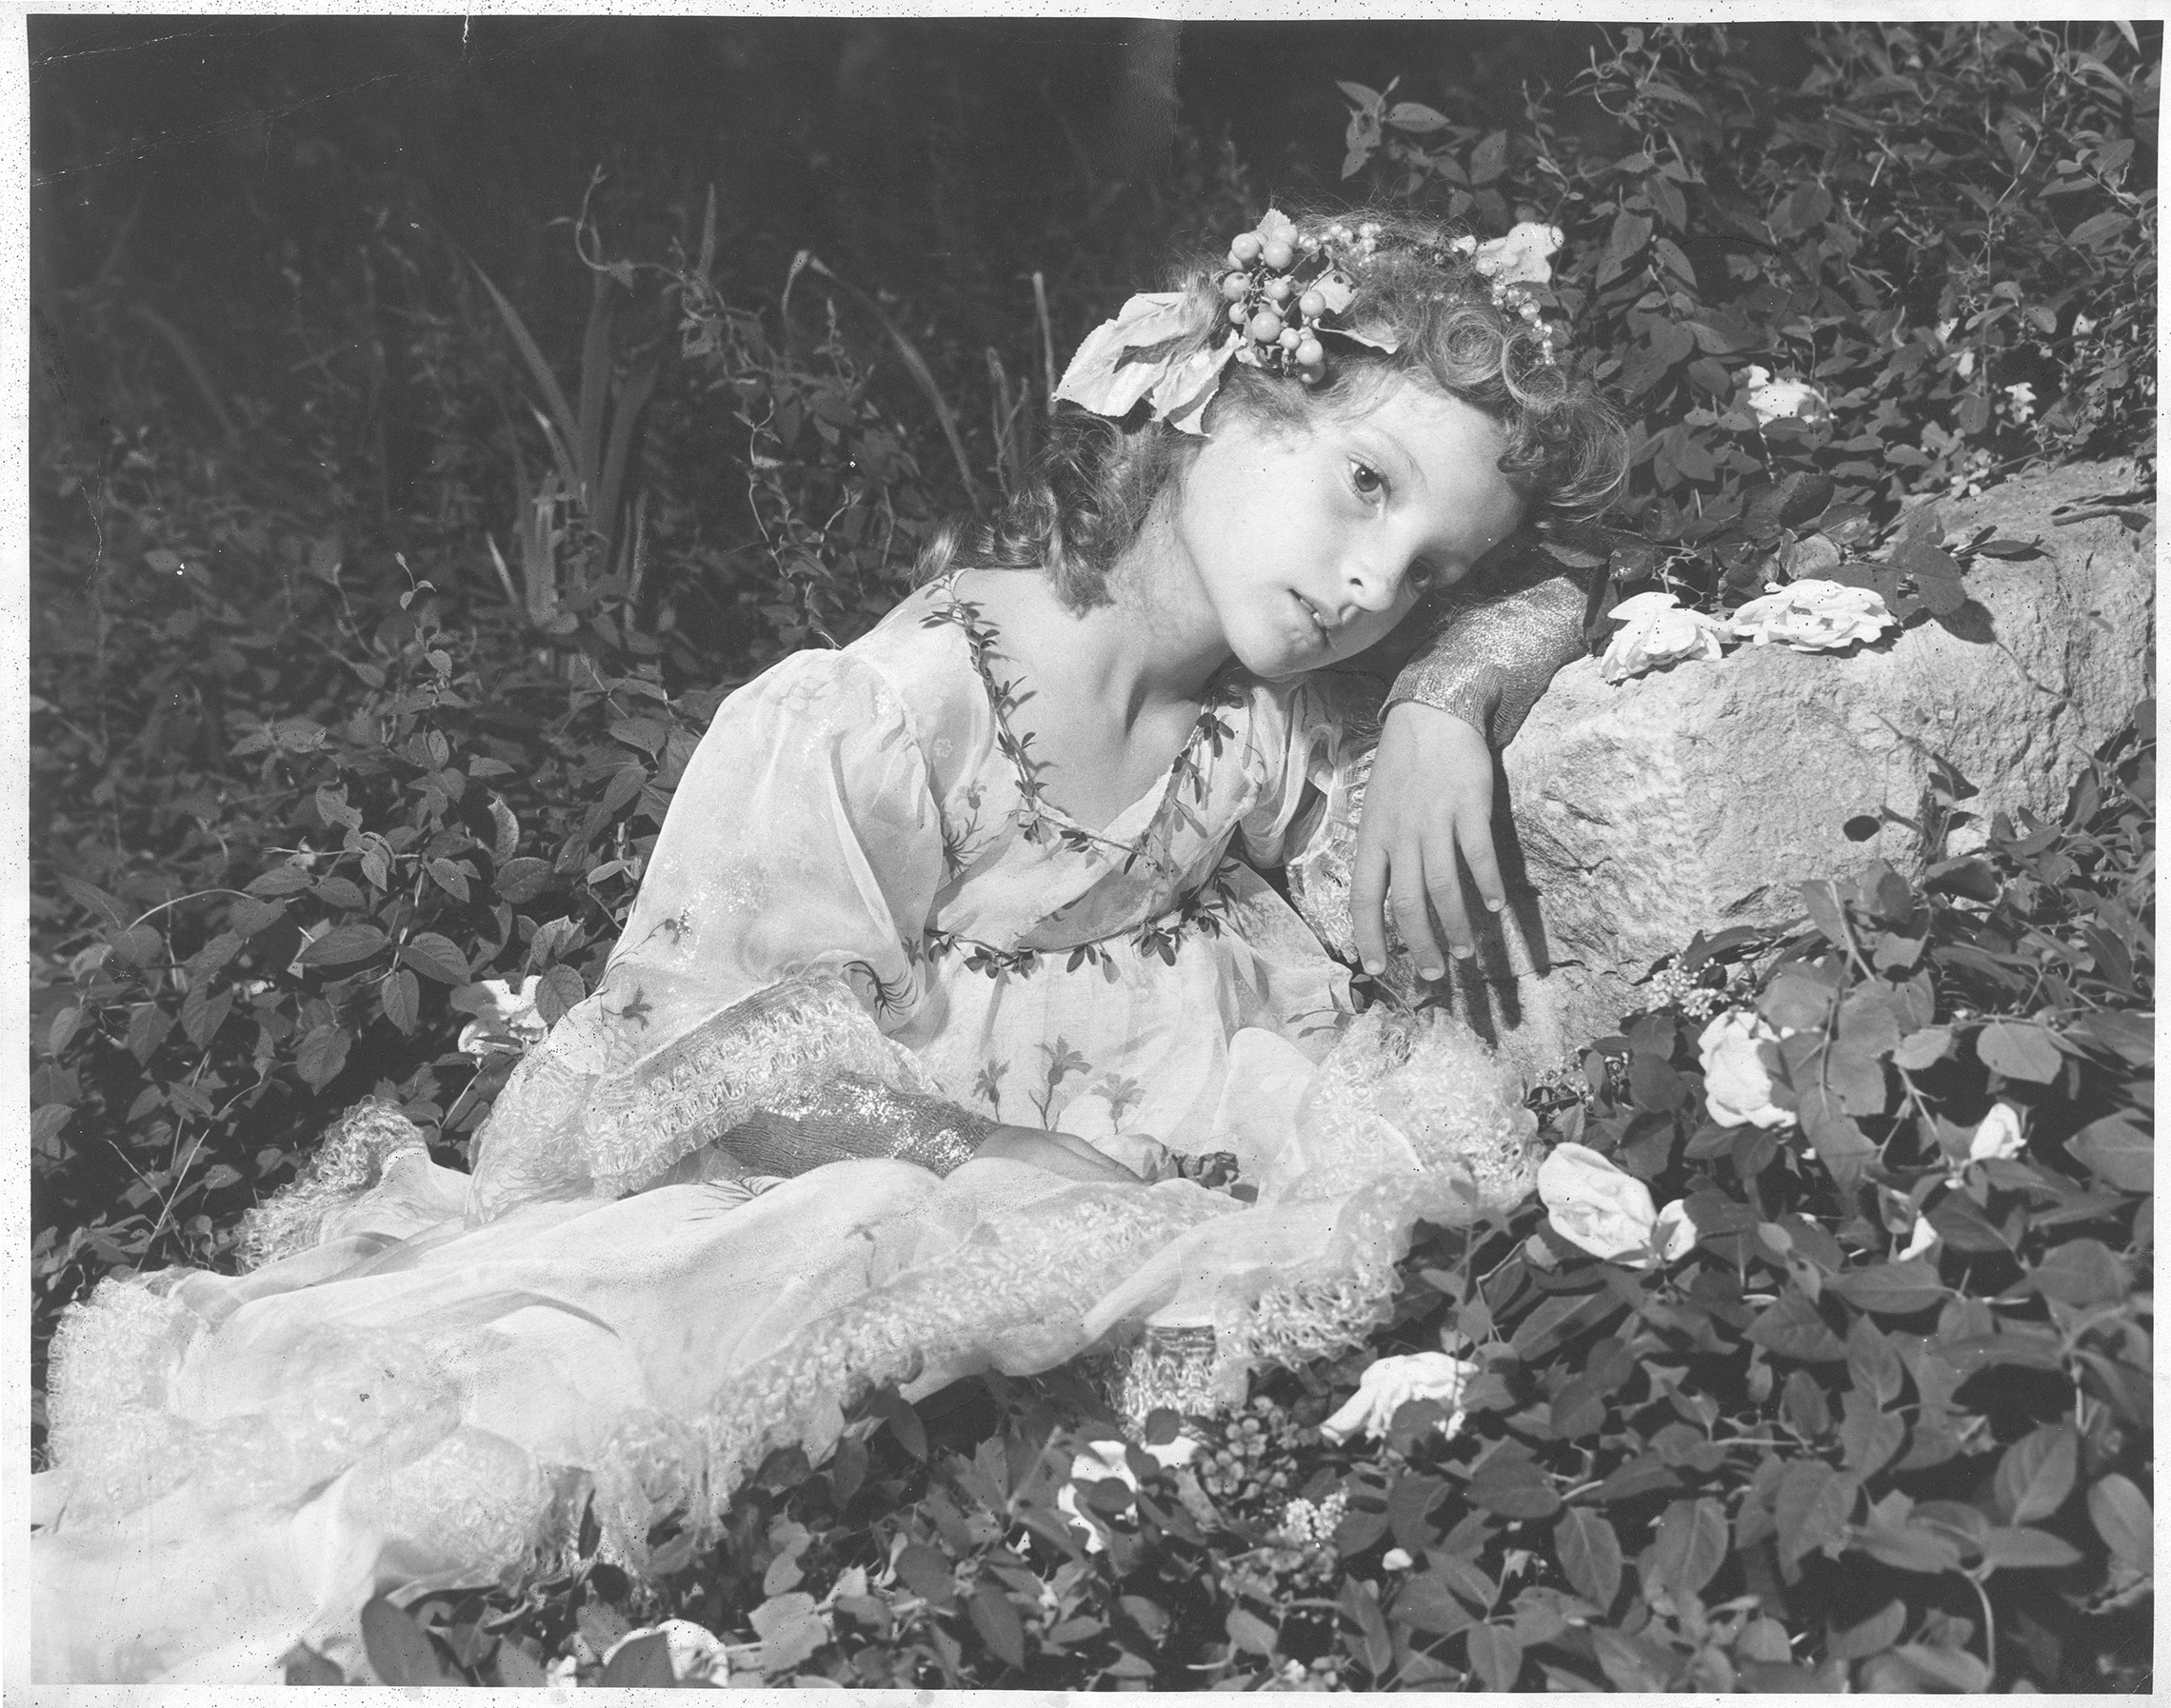 A young girl poses in a bed of foliage wearing a flowing dress and floral headpiece.